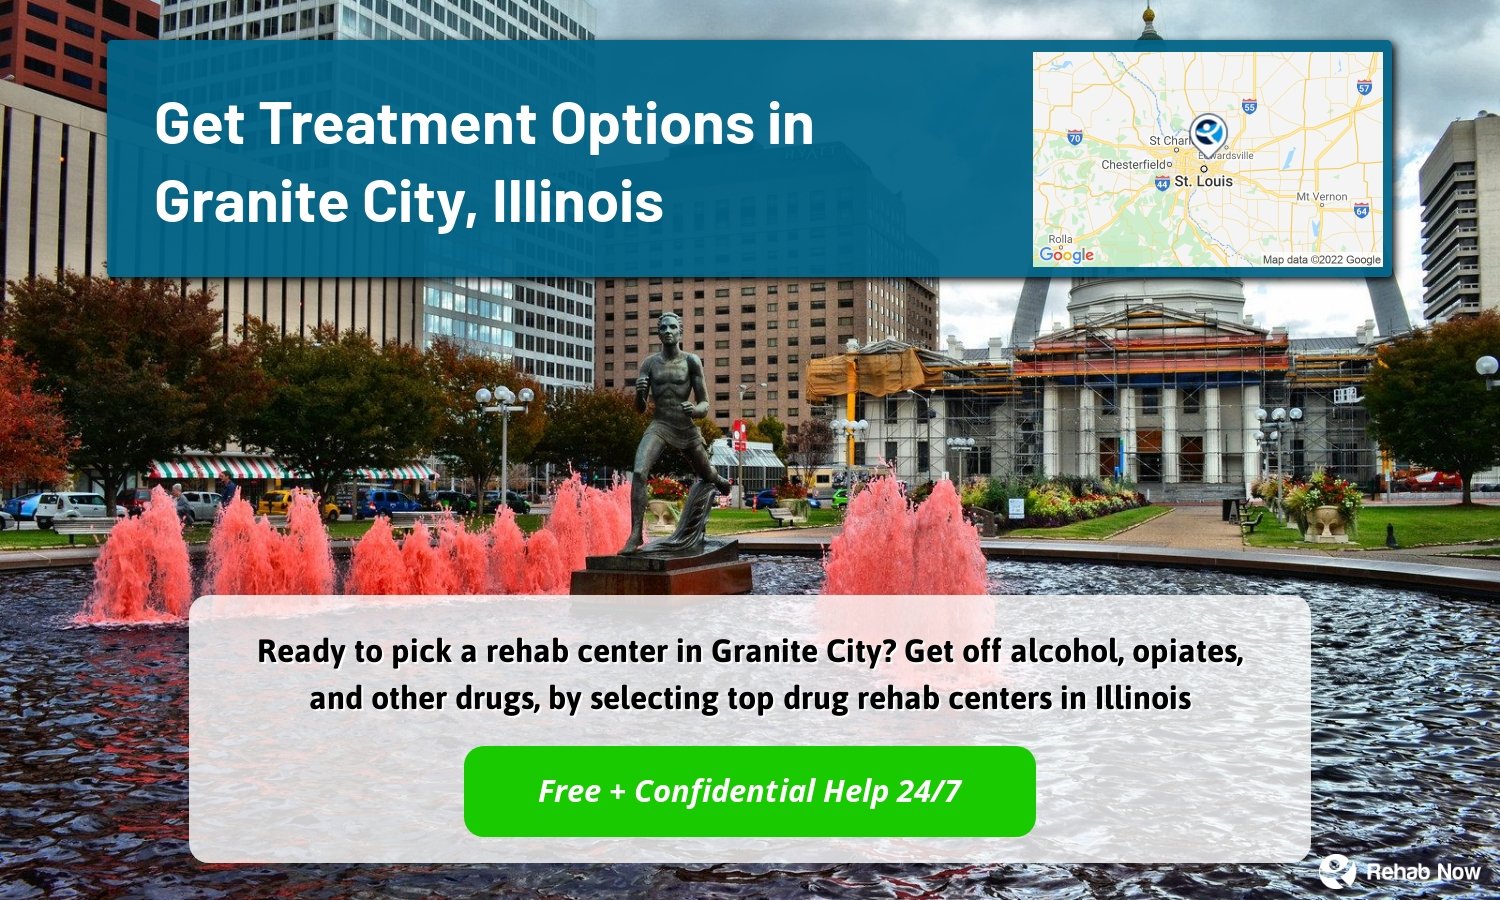 Ready to pick a rehab center in Granite City? Get off alcohol, opiates, and other drugs, by selecting top drug rehab centers in Illinois